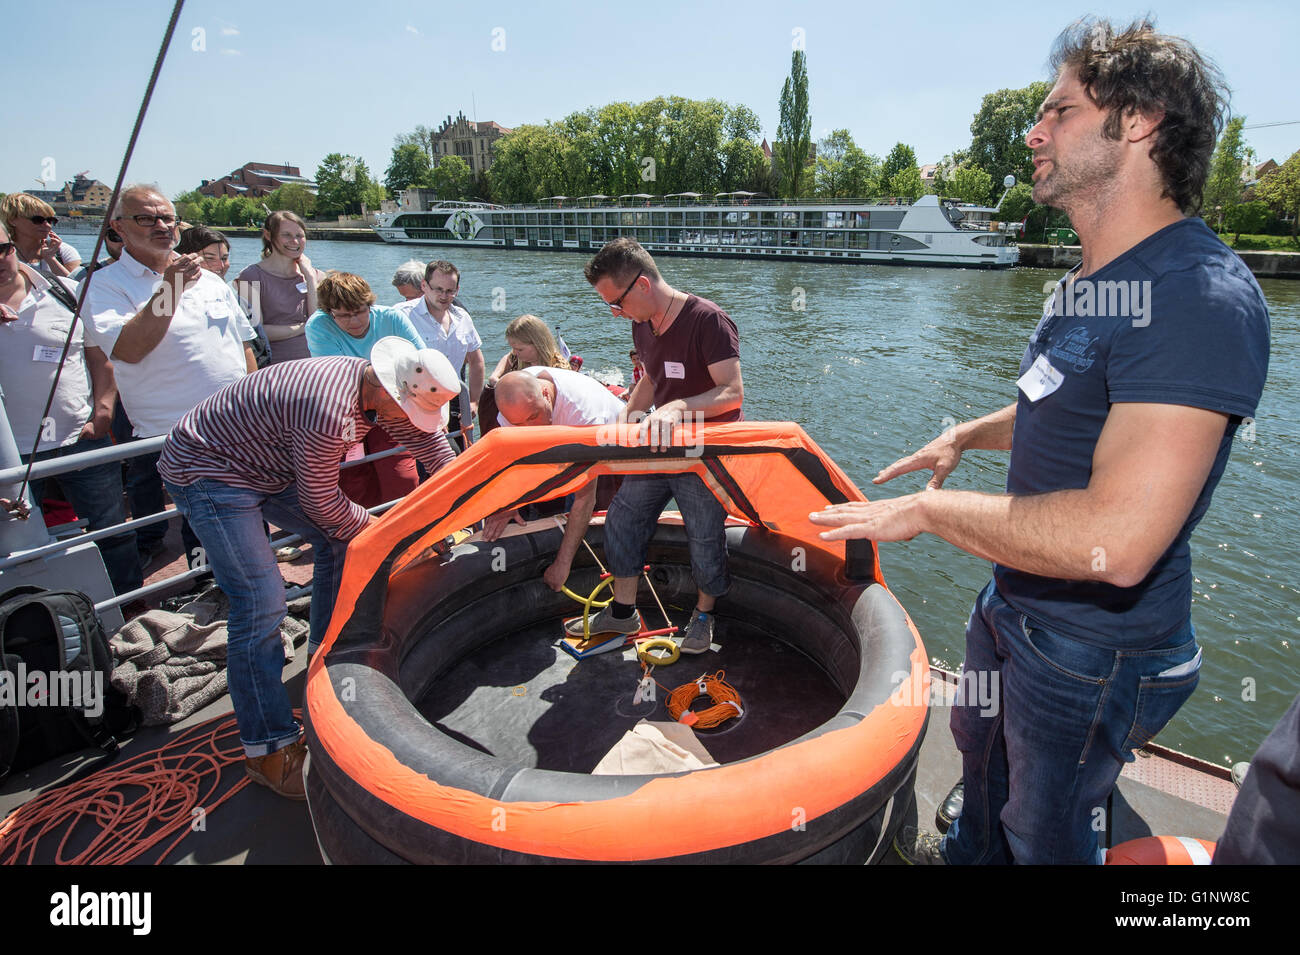 Regensburg, Germany. 7th May, 2016. Michael Buschheuer, initiator of the refugee initiative 'Sea Eye' from Regensburg, explaining a rescue island during a training mission at Donau river in Regensburg, Germany, 7 May 2016. The participants of 'Sea-Eye', a private rescue initiative for refugees experiencing distress at sea, practiced rescue missions in Regensburg. PHOTO: ARMIN WEIGEL/dpa/Alamy Live News Stock Photo